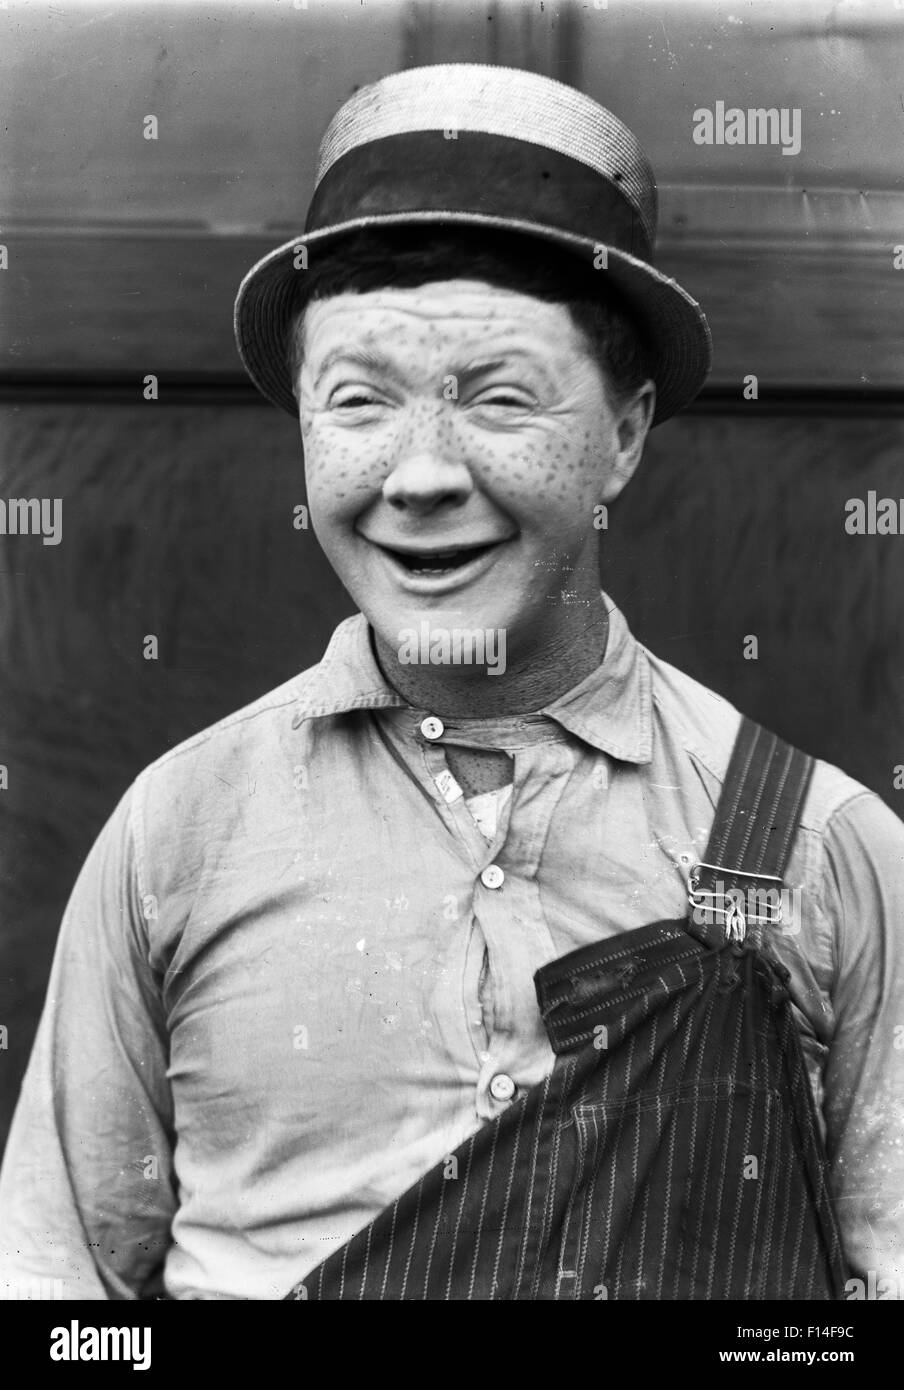 1910s 1920s MAN MOVIE ACTOR COMEDIAN STANDING SMILING WITH HUMOROUS FACIAL EXPRESSION SILENT MOVIE STILL Stock Photo